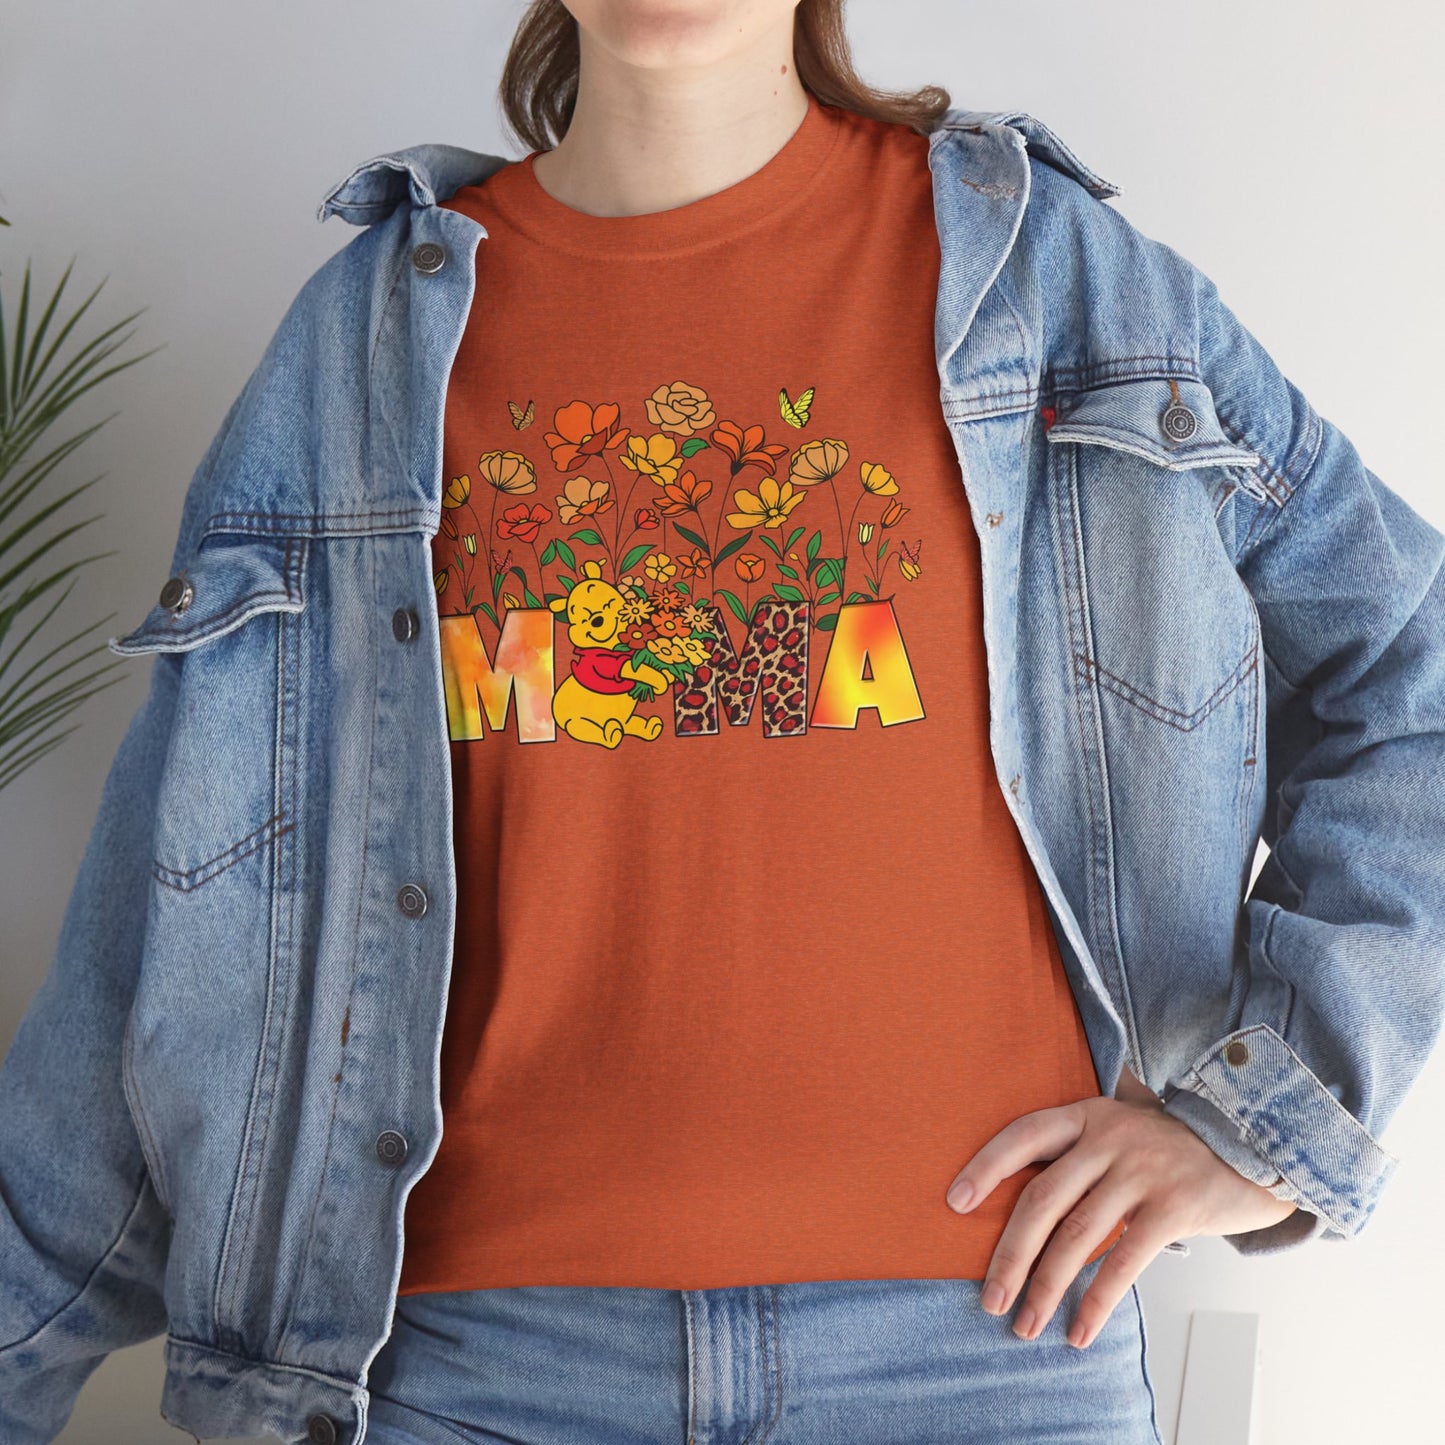 Pooh Floral Mama   - Unisex Heavy Cotton Tee